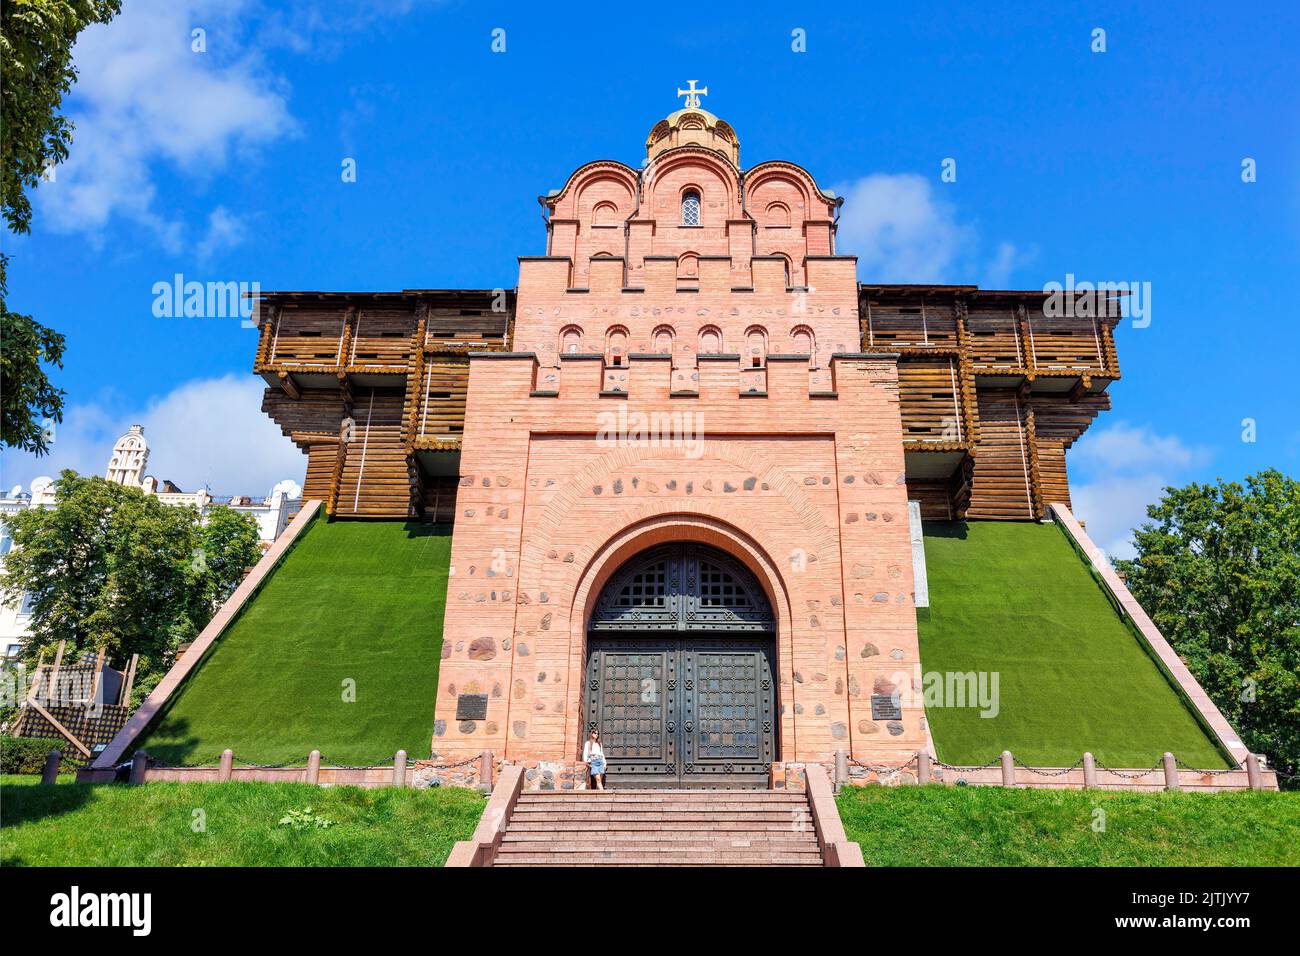 The reconstructed building of the ancient Golden Gate in the center of Kyiv against the blue sky on a summer day. August 21, 2022 Kyiv, Ukraine. Stock Photo